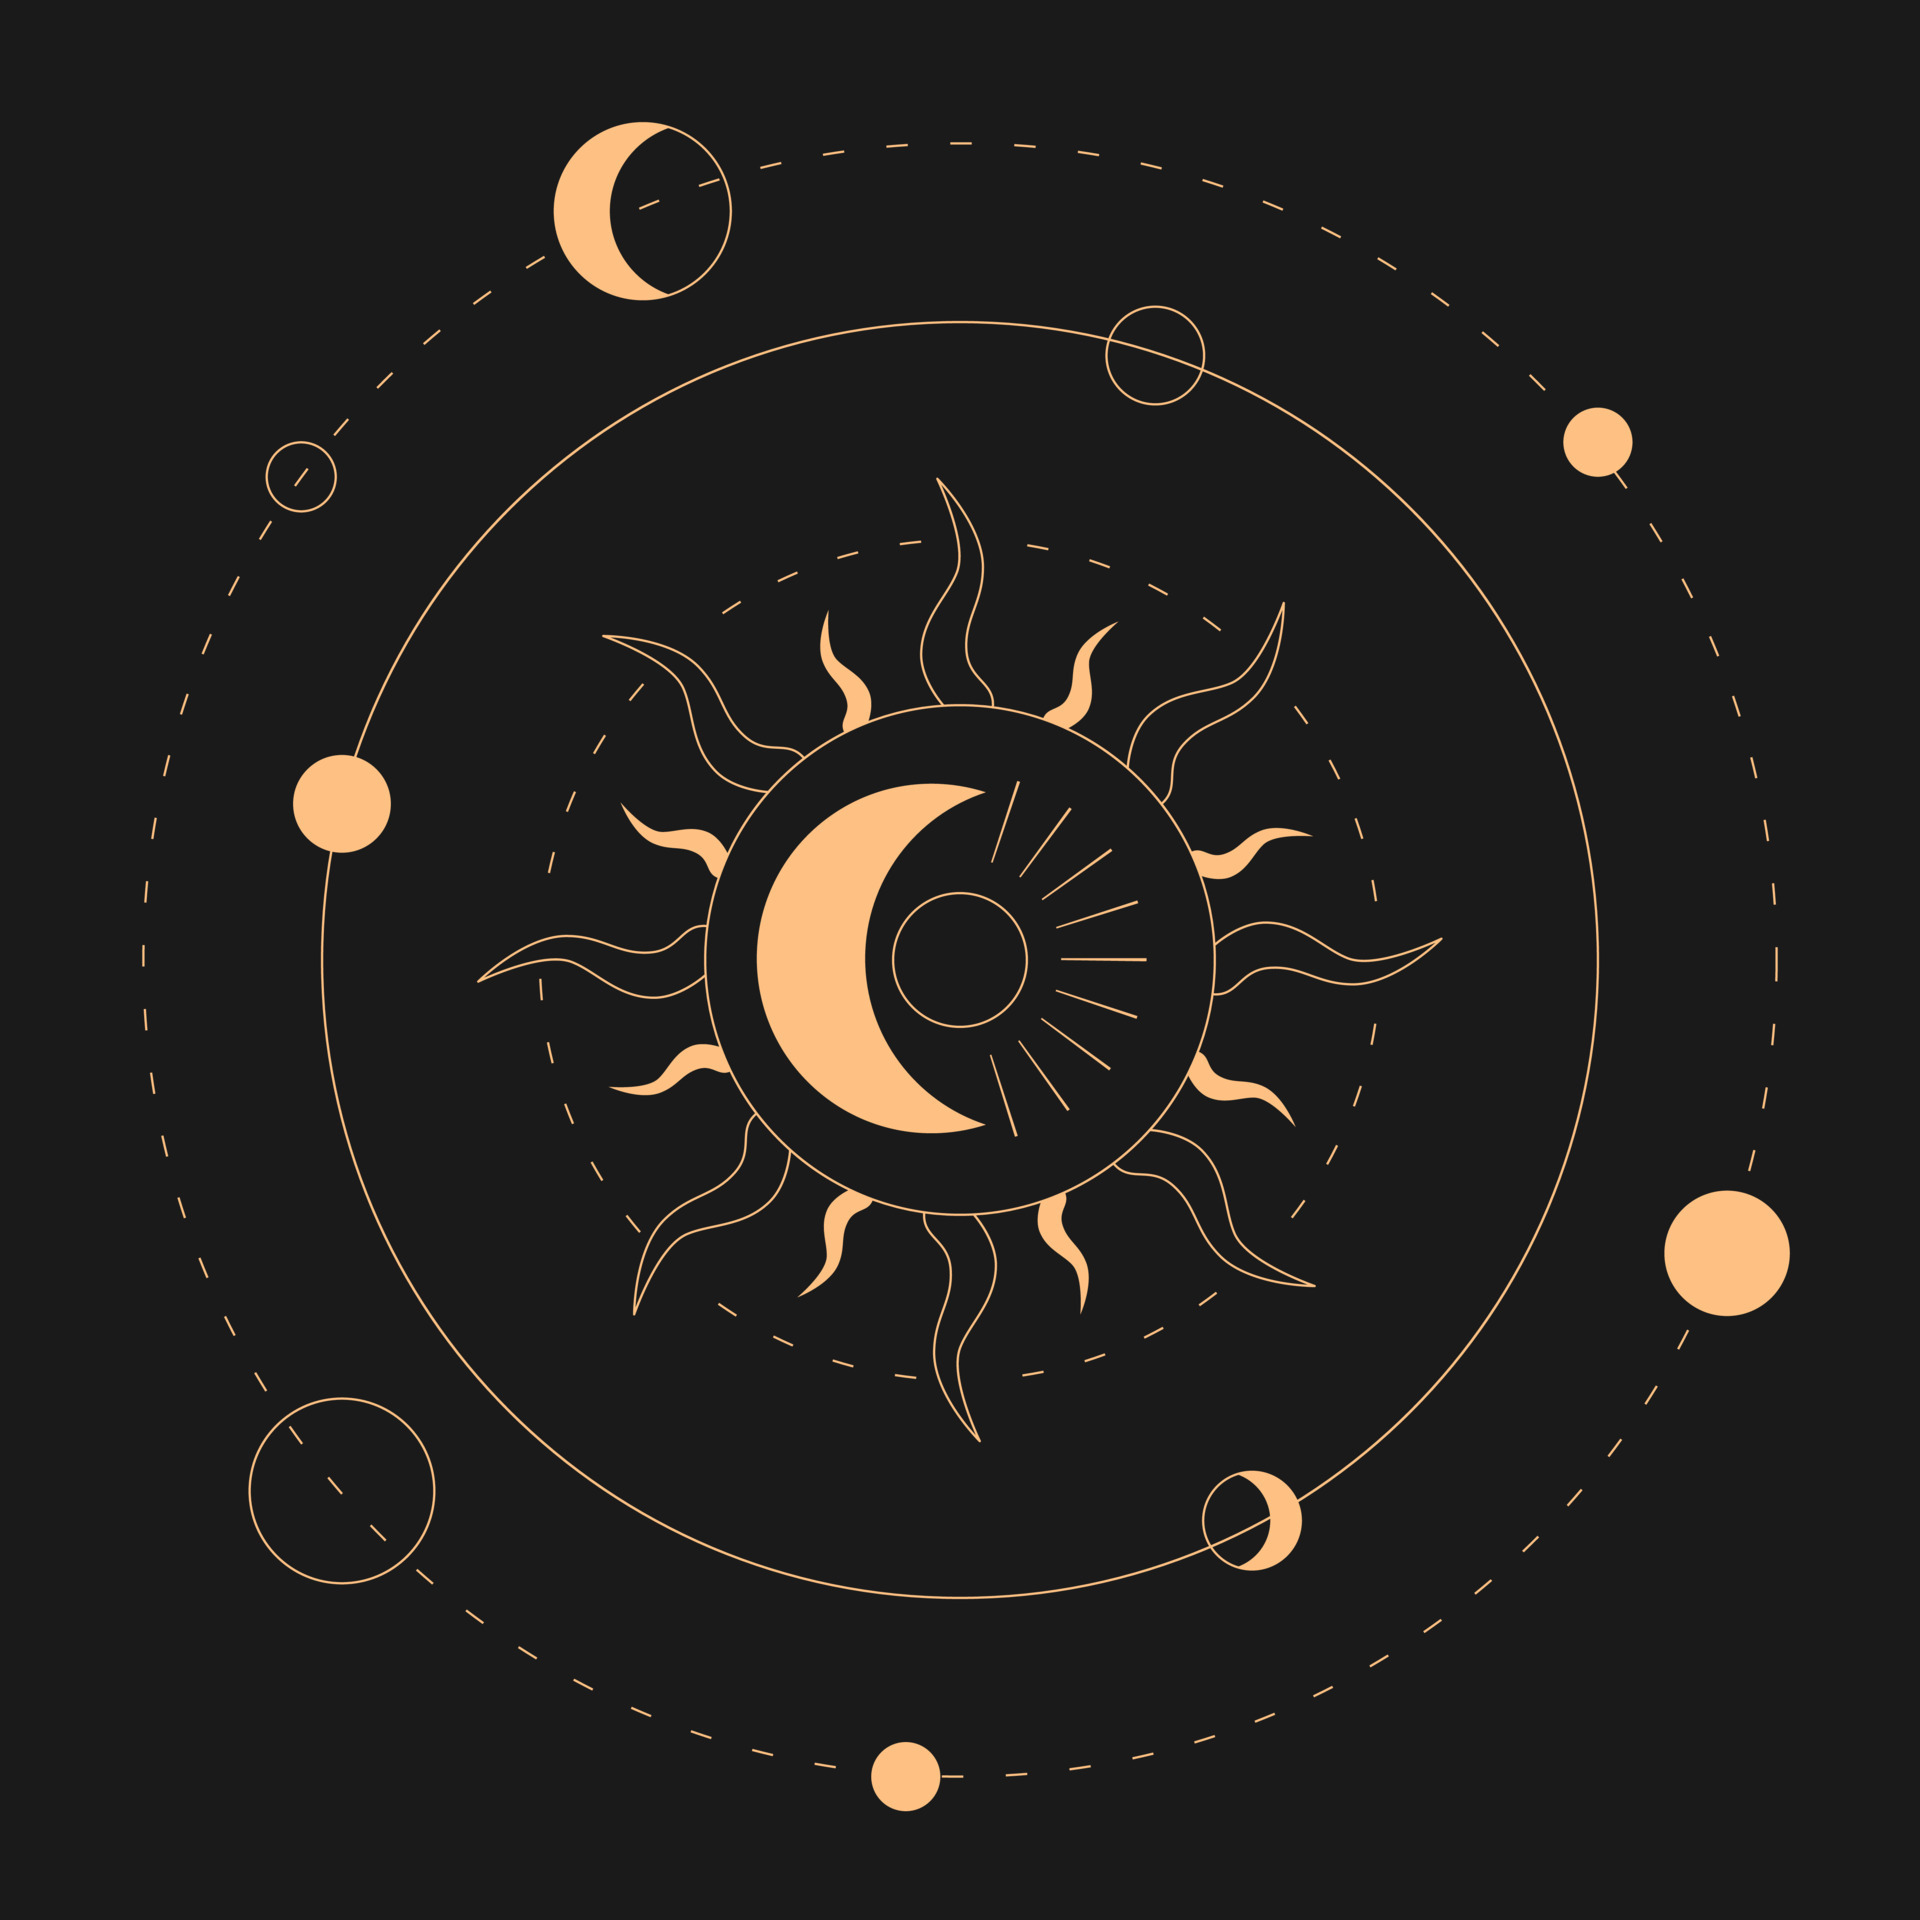 Devenir Partenaires ! Celestial-sun-and-moon-magical-banner-for-astrology-celestial-alchemy-device-of-the-universe-crescent-sun-with-the-moon-and-planets-on-a-black-background-esoteric-illustration-vector